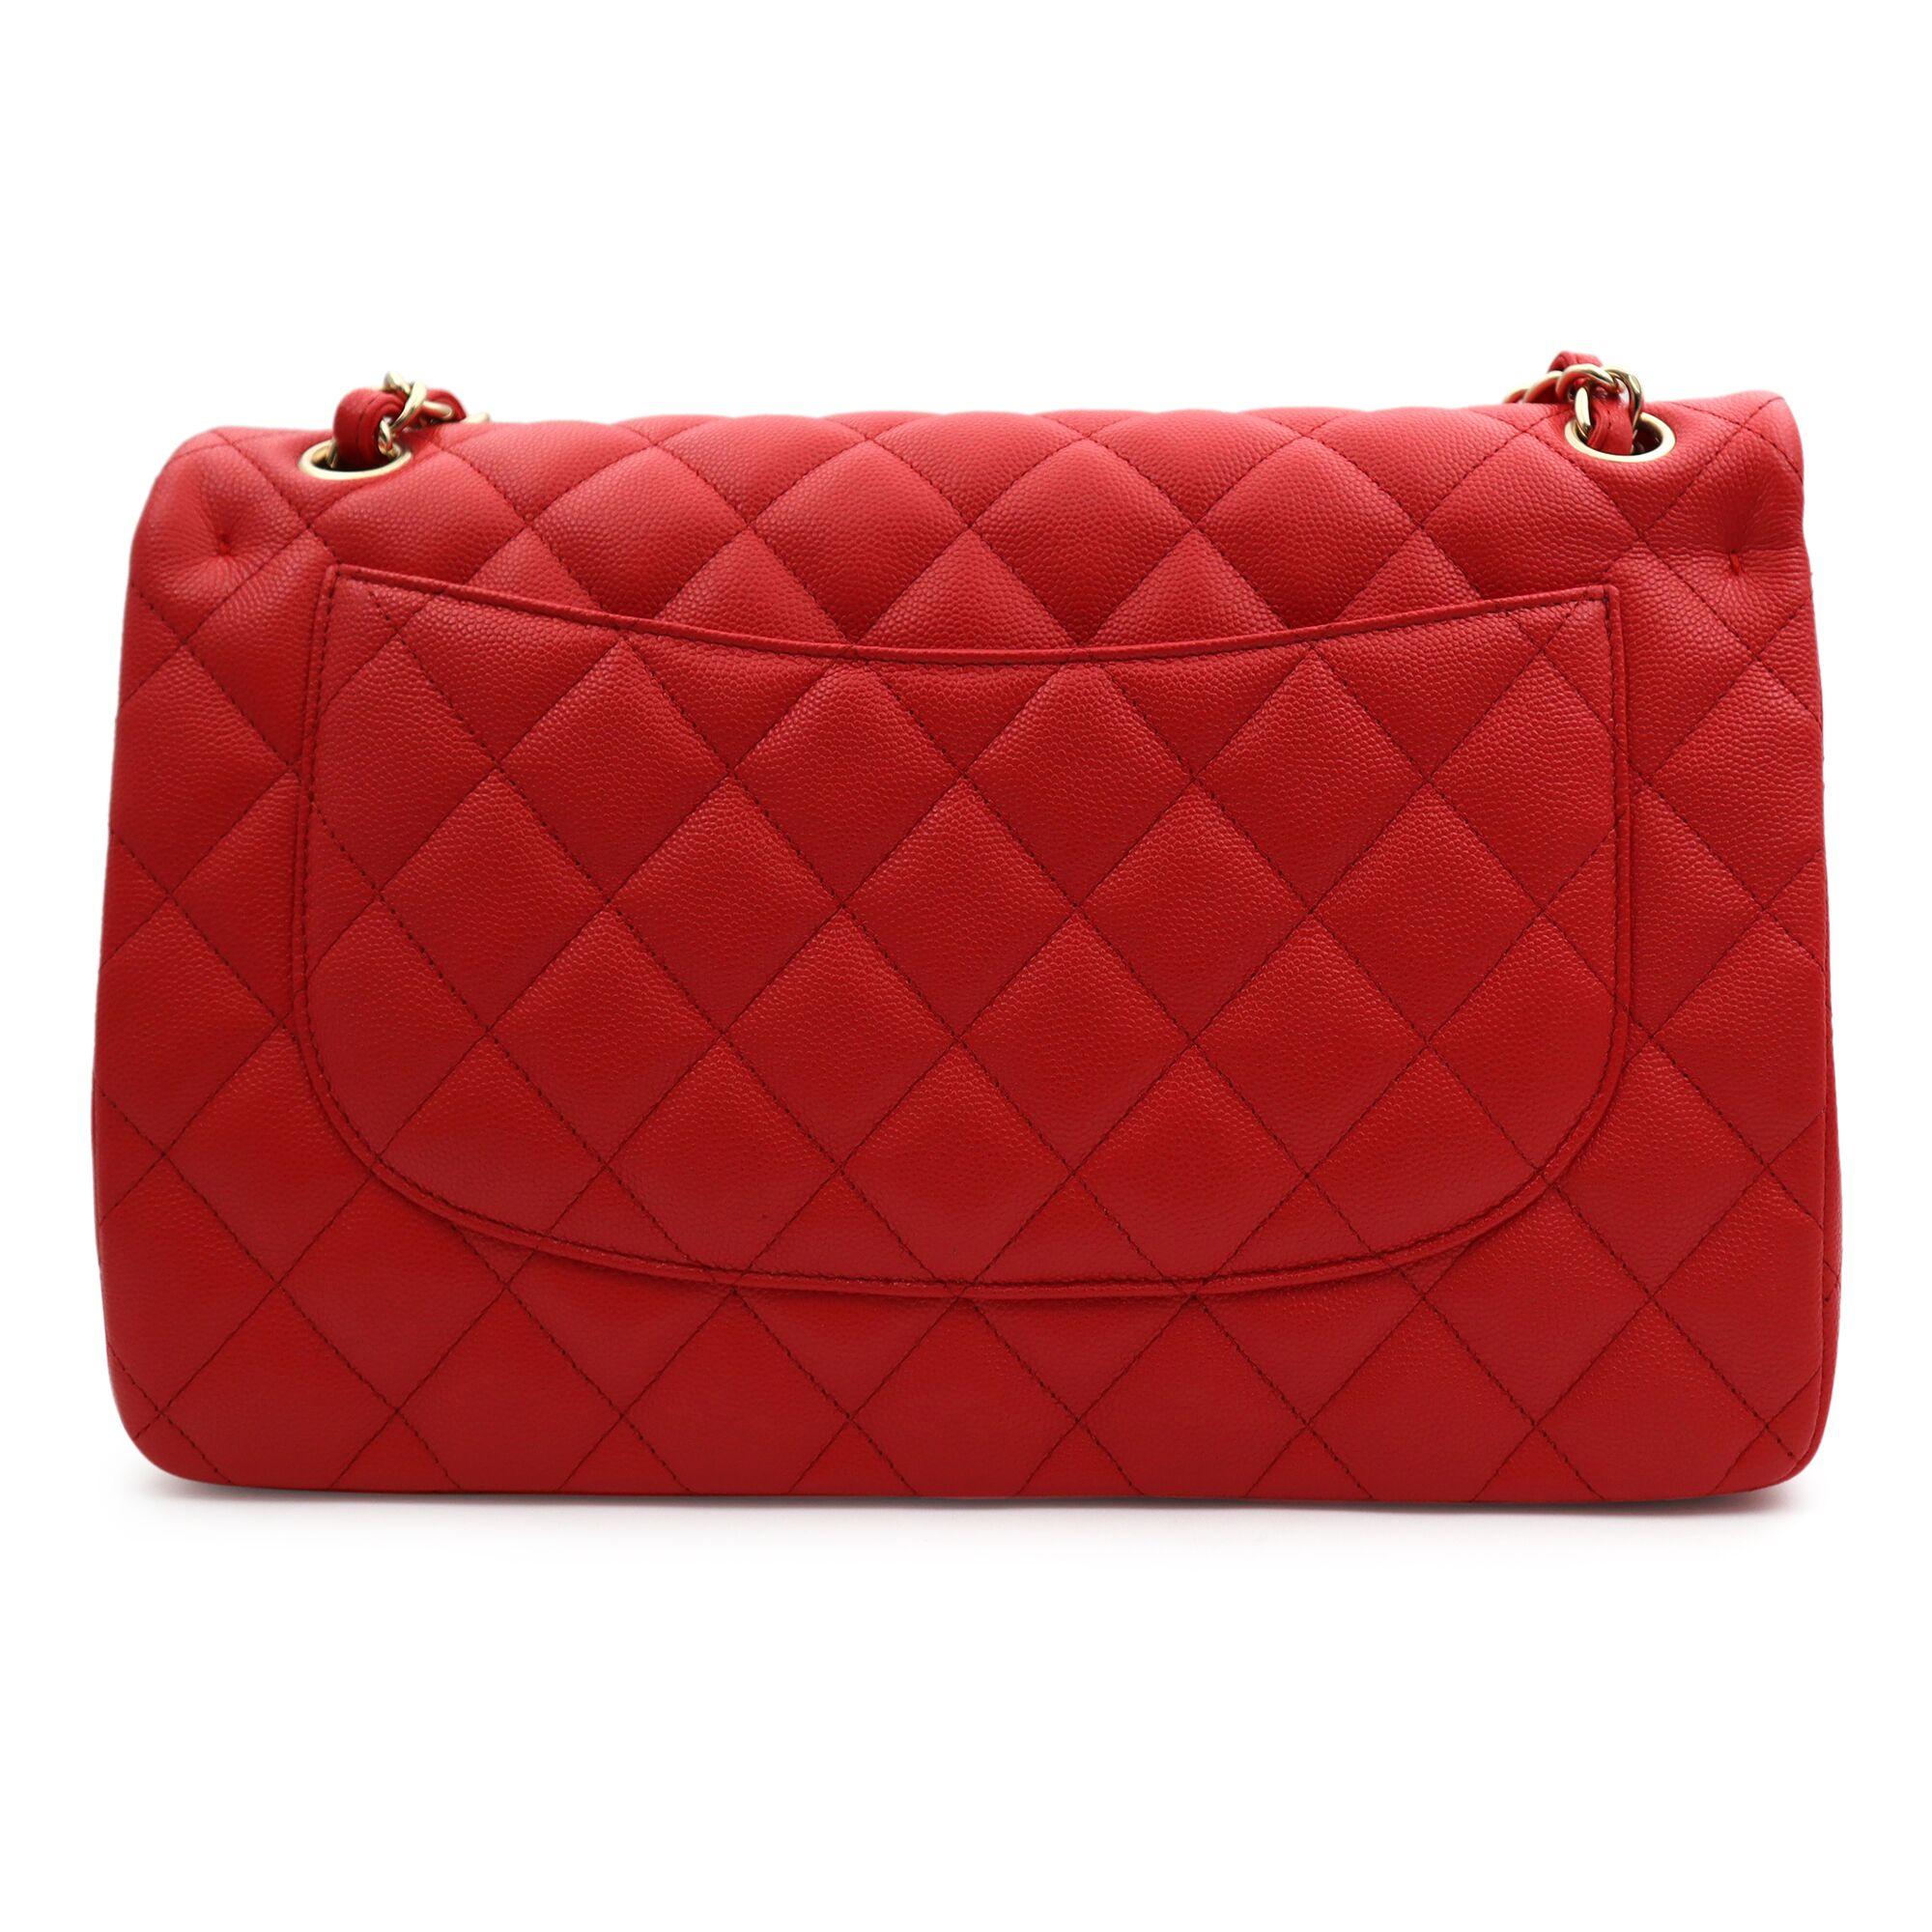 This chic Chanel classic large double flap bag is crafted of caviar leather in beautiful coral red color. The bag features a gold tone chain link leather threaded shoulder straps and a facing gold tone Chanel CC turn lock. The bag opens facing flap